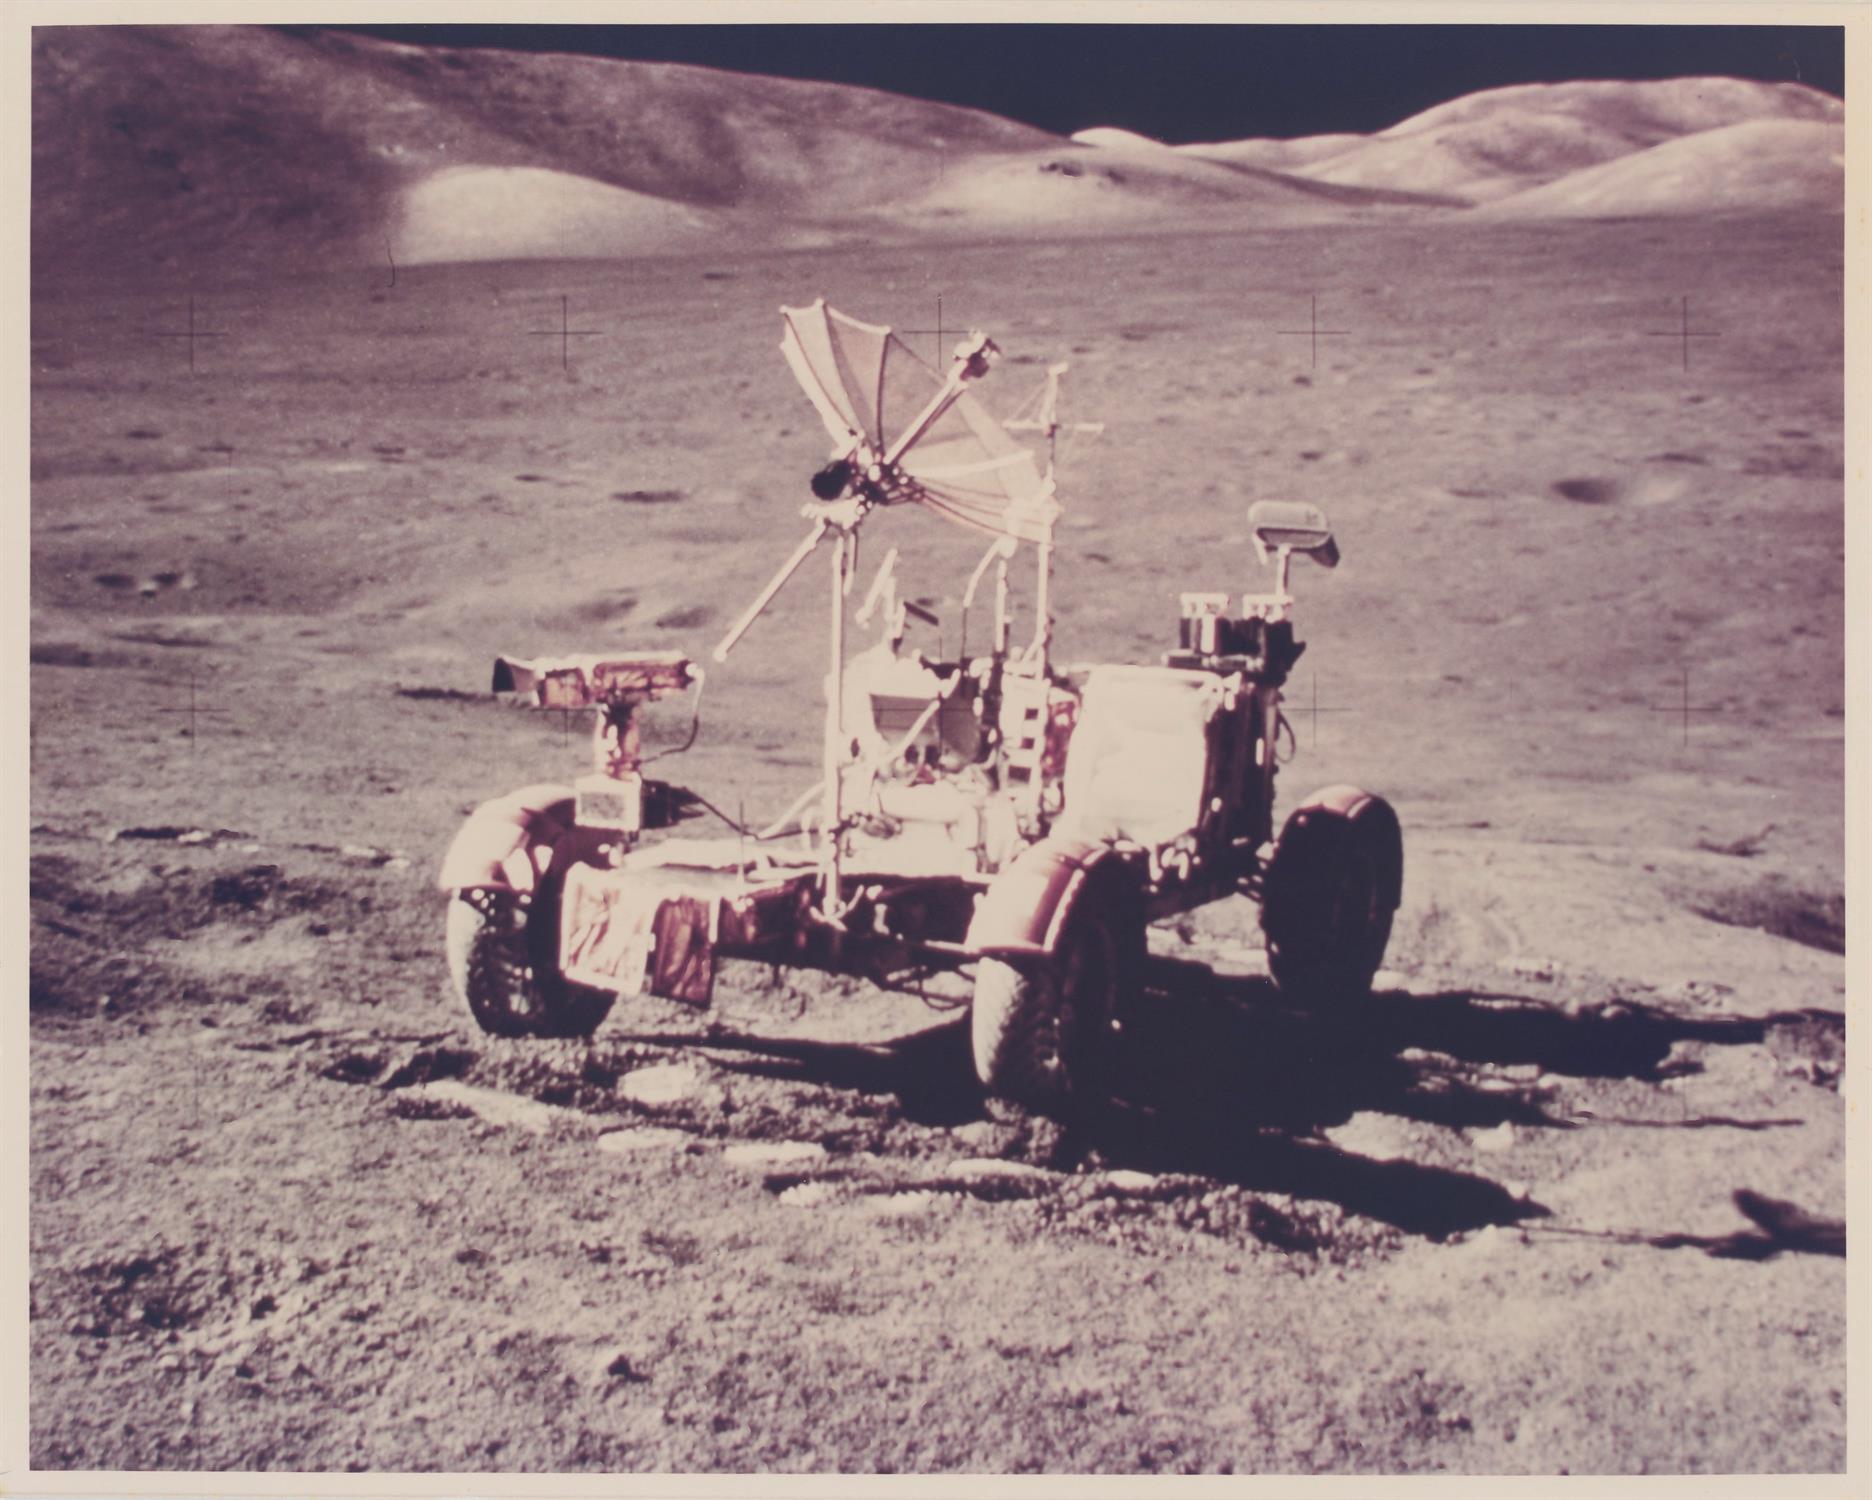 The Lunar Rover in the Valley of Taurus-Littrow, station 8, Apollo 17, December 1972, EVA 3